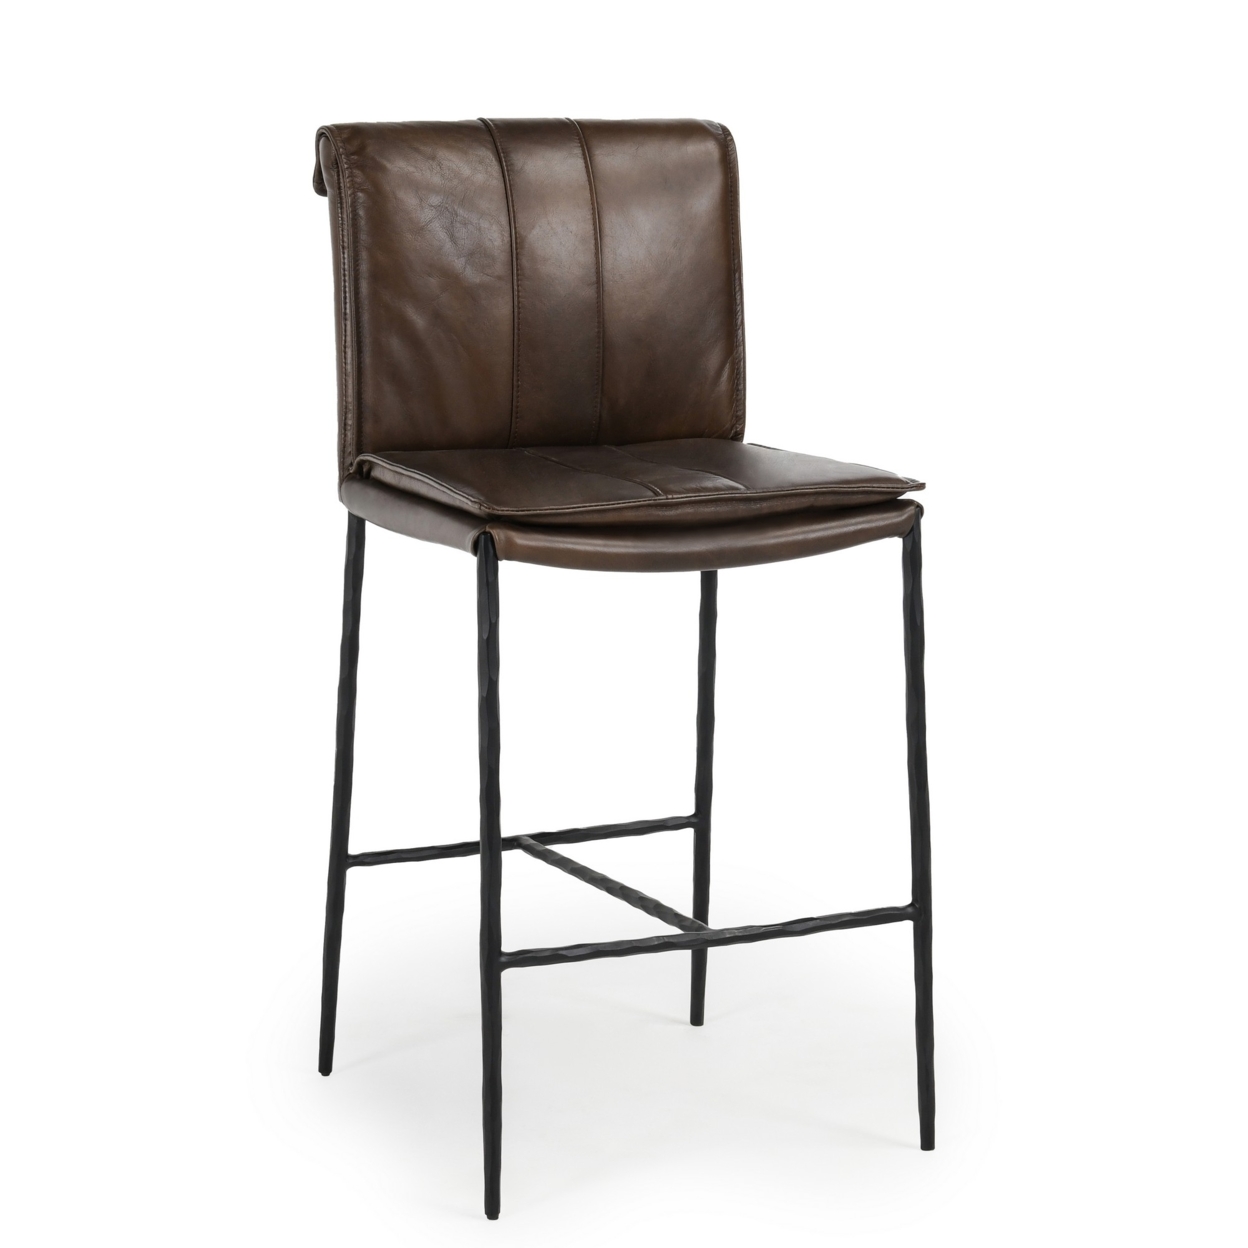 Iva 27 Inch Counter Stool Chair, Rolled Back, Iron, Dark Brown Leather - Saltoro Sherpi